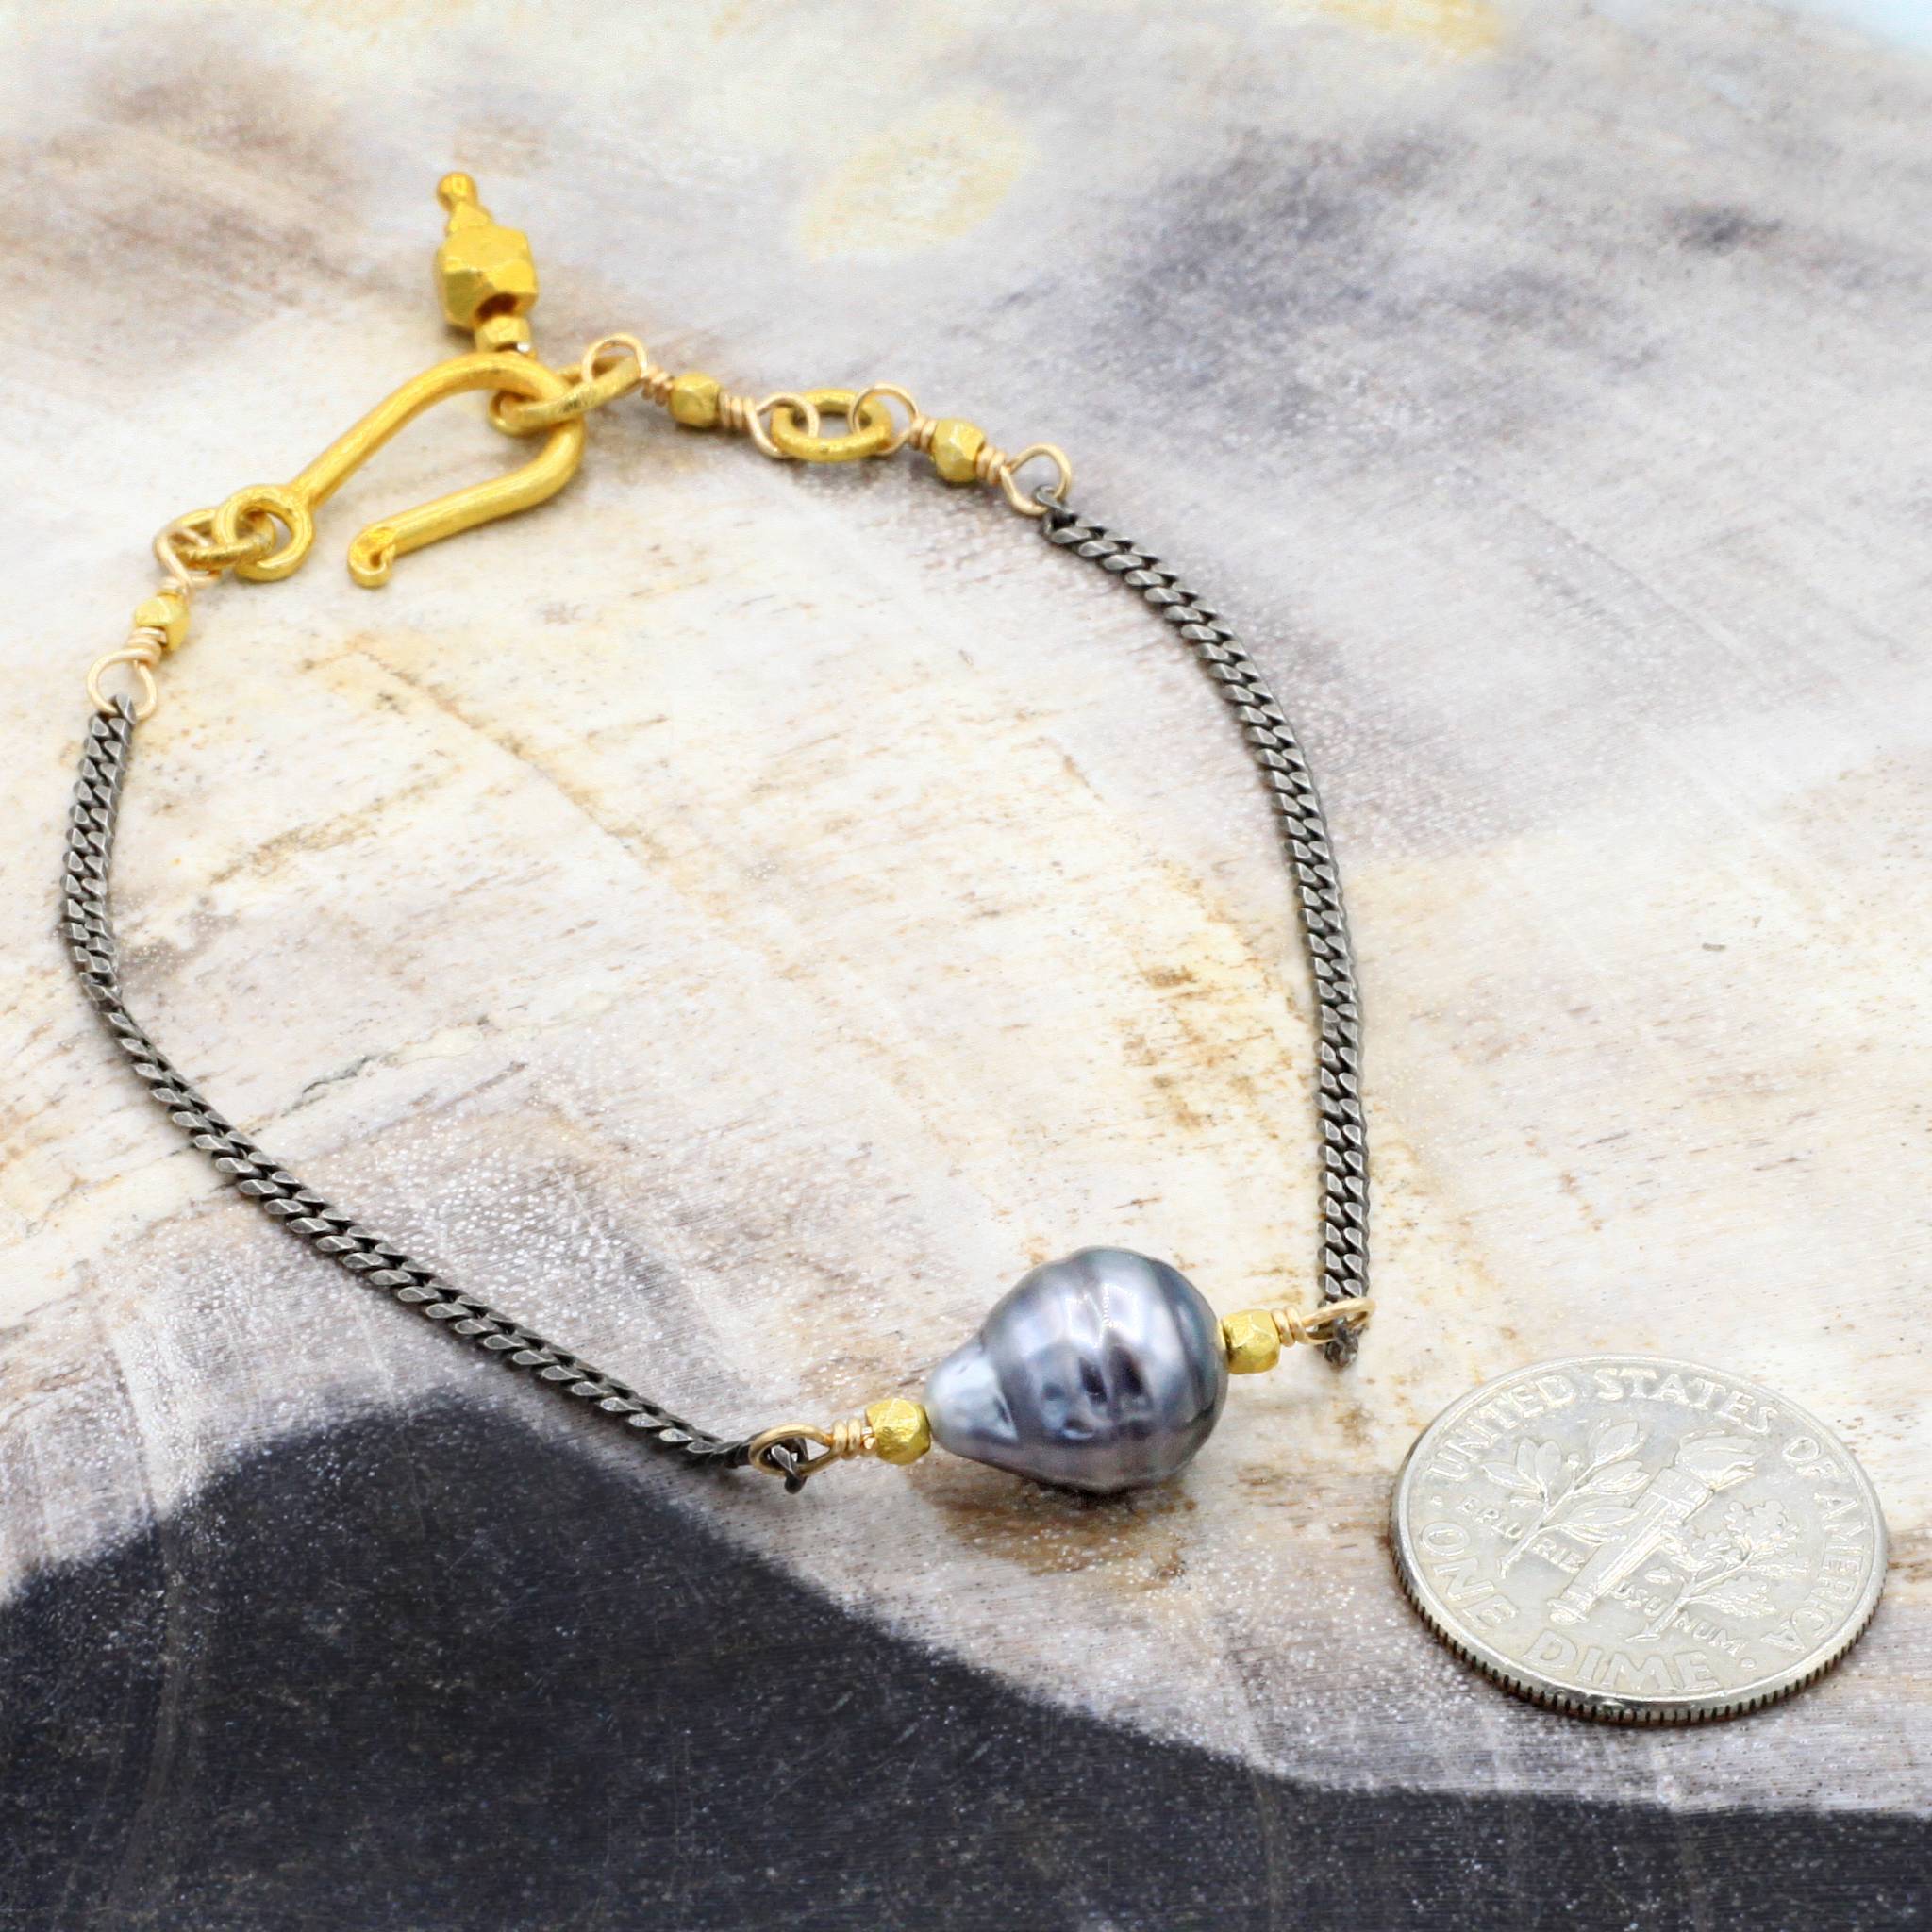 Oxidized Sterling Silver Chain Necklace,Oxidized Silver Bracelet, Oxidized  Silver Anklet -10mm Flat Circle Link.